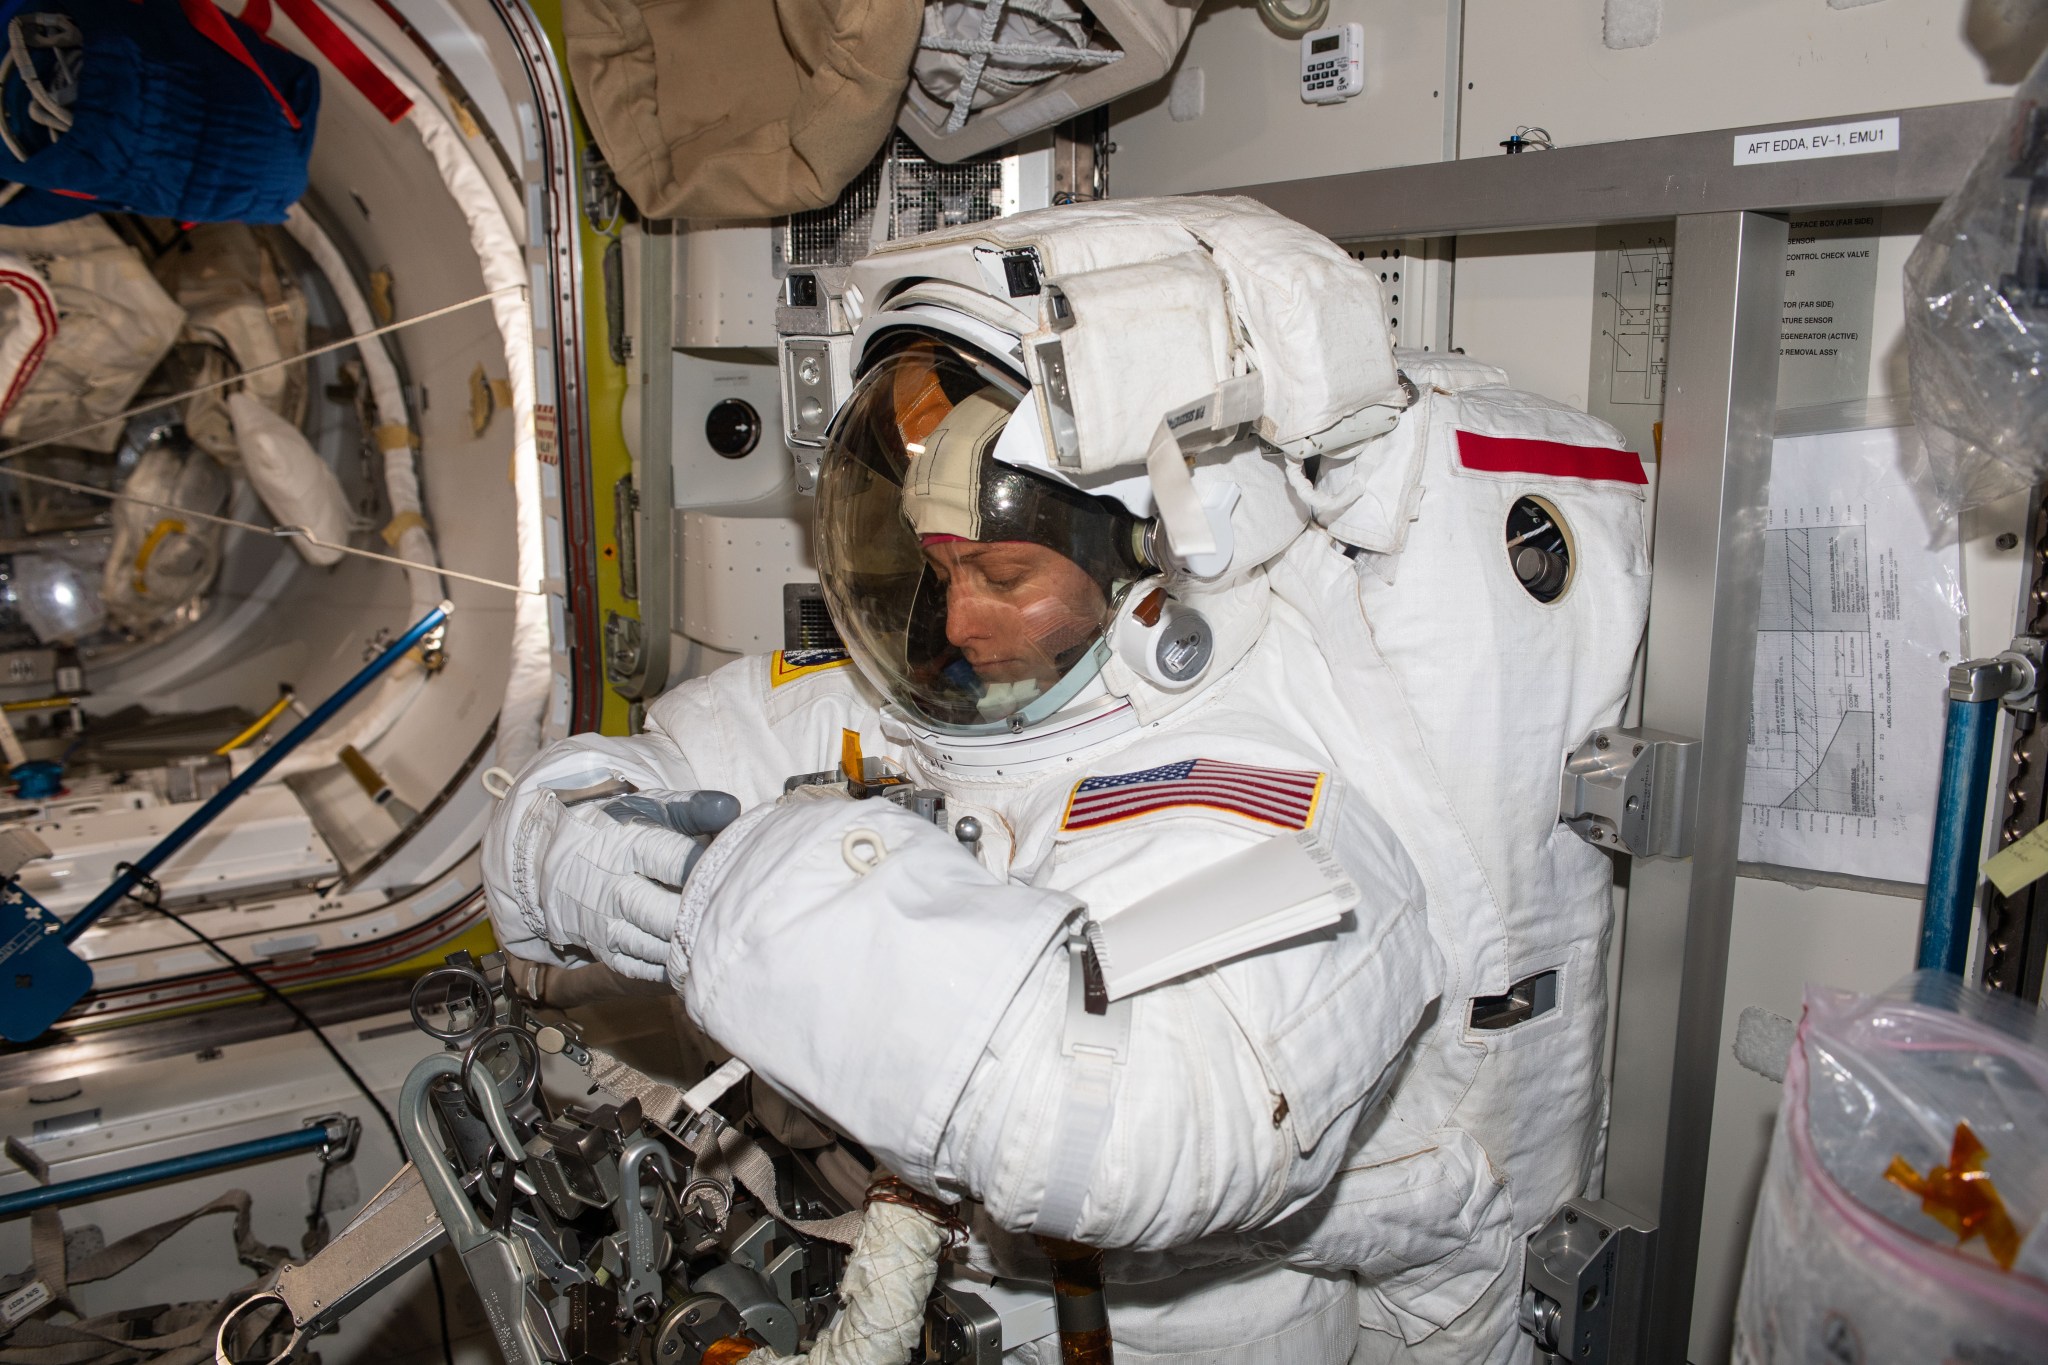 O'Hara is inside a white spacesuit with an American flag on the shoulder. Her face is visible through the clear front of the helmet, and she is using her gloved right hand to tuck the suit into the glove of her left hand. The suit is attached to a metal frame on the wall.